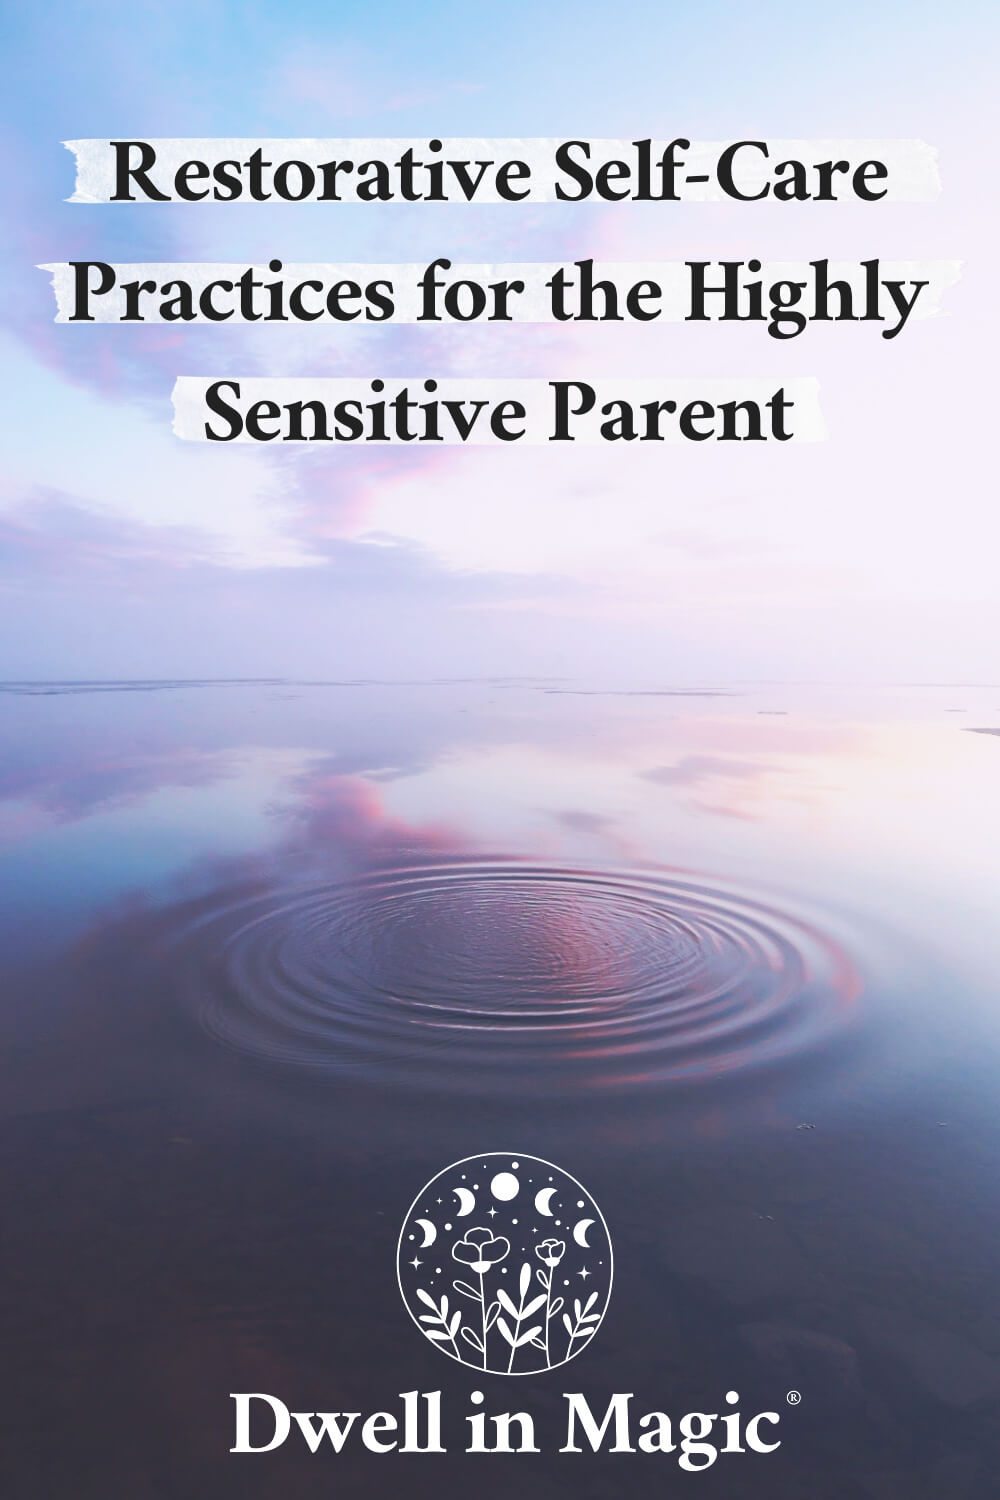 Restorative self-care tips for the highly sensitive parent